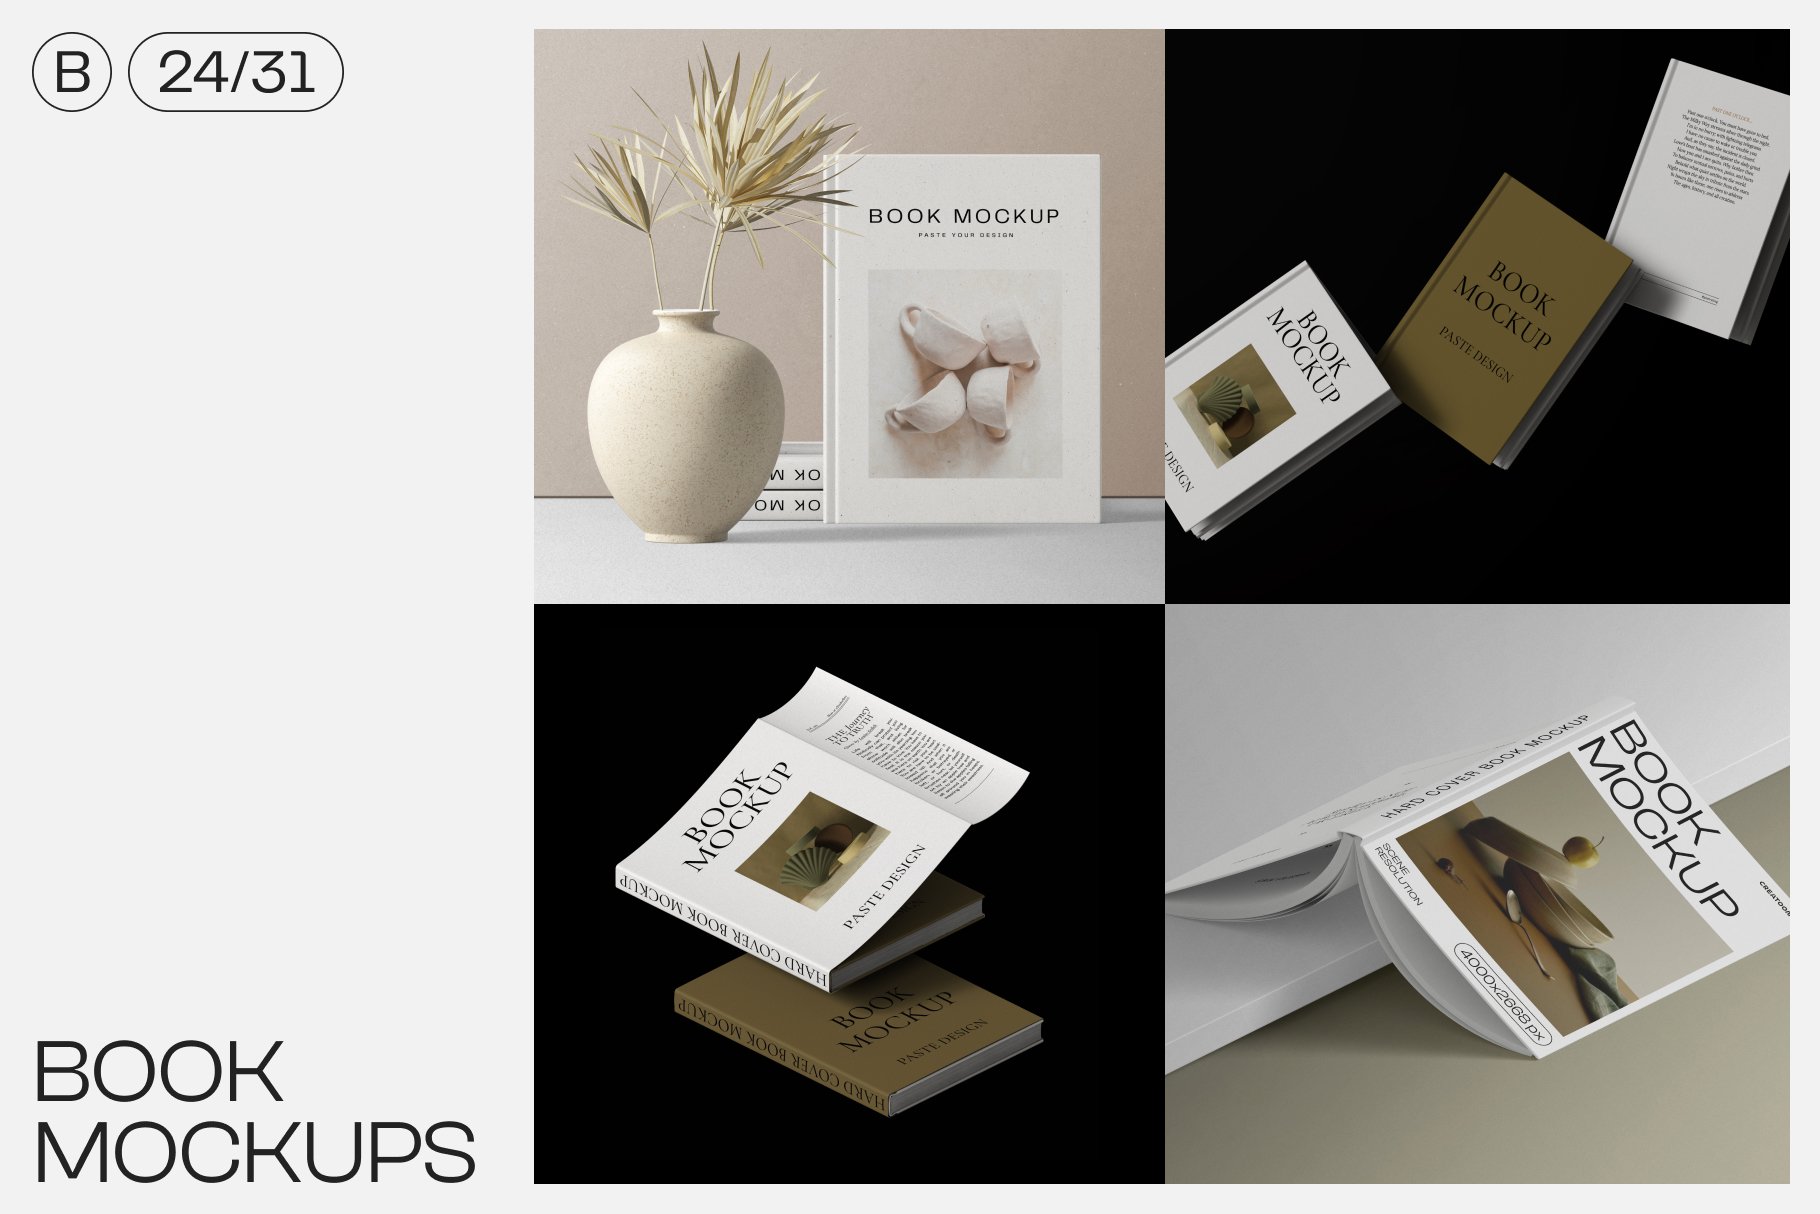 55 book mockups cover image.